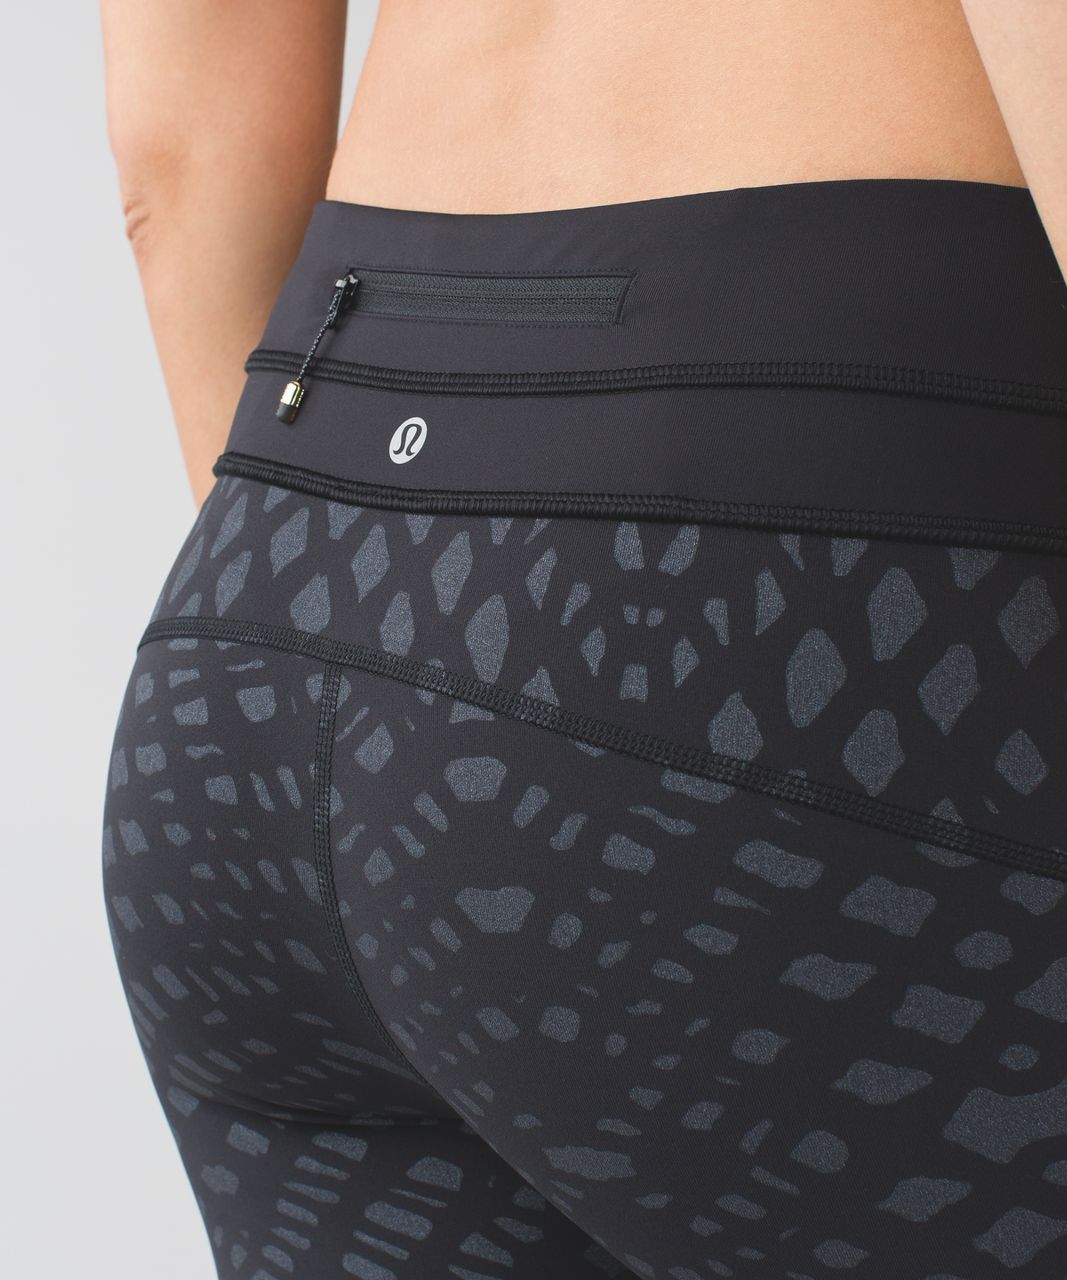 Lululemon Pace Tight *Full-on Luxtreme - Lace Play Shimmer Black Black / Black